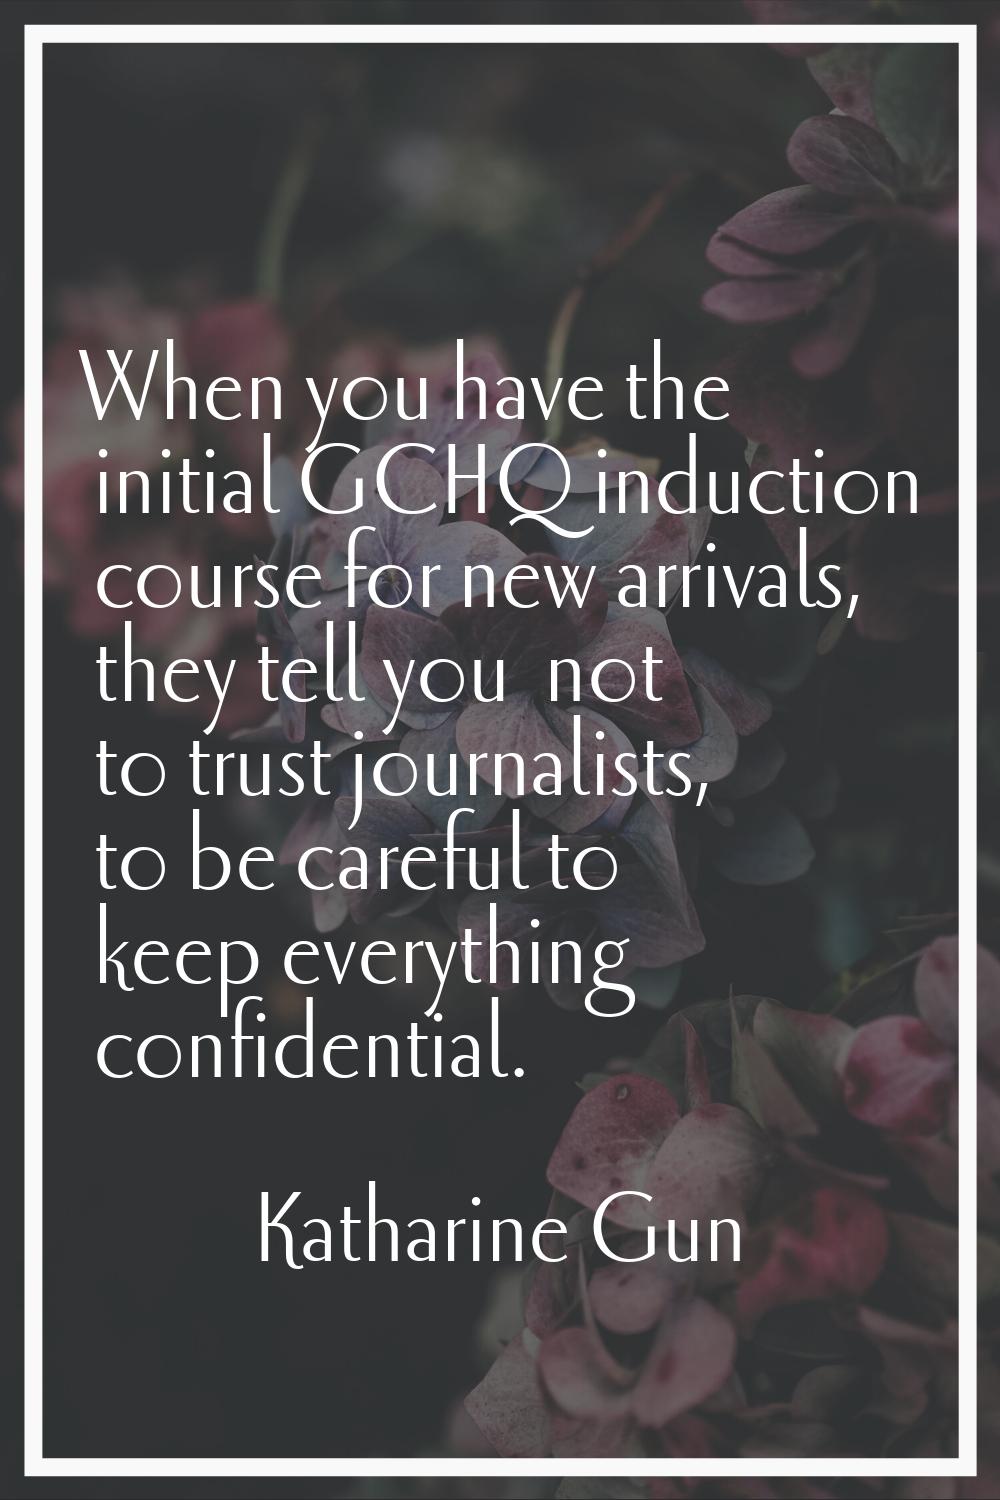 When you have the initial GCHQ induction course for new arrivals, they tell you… not to trust journ